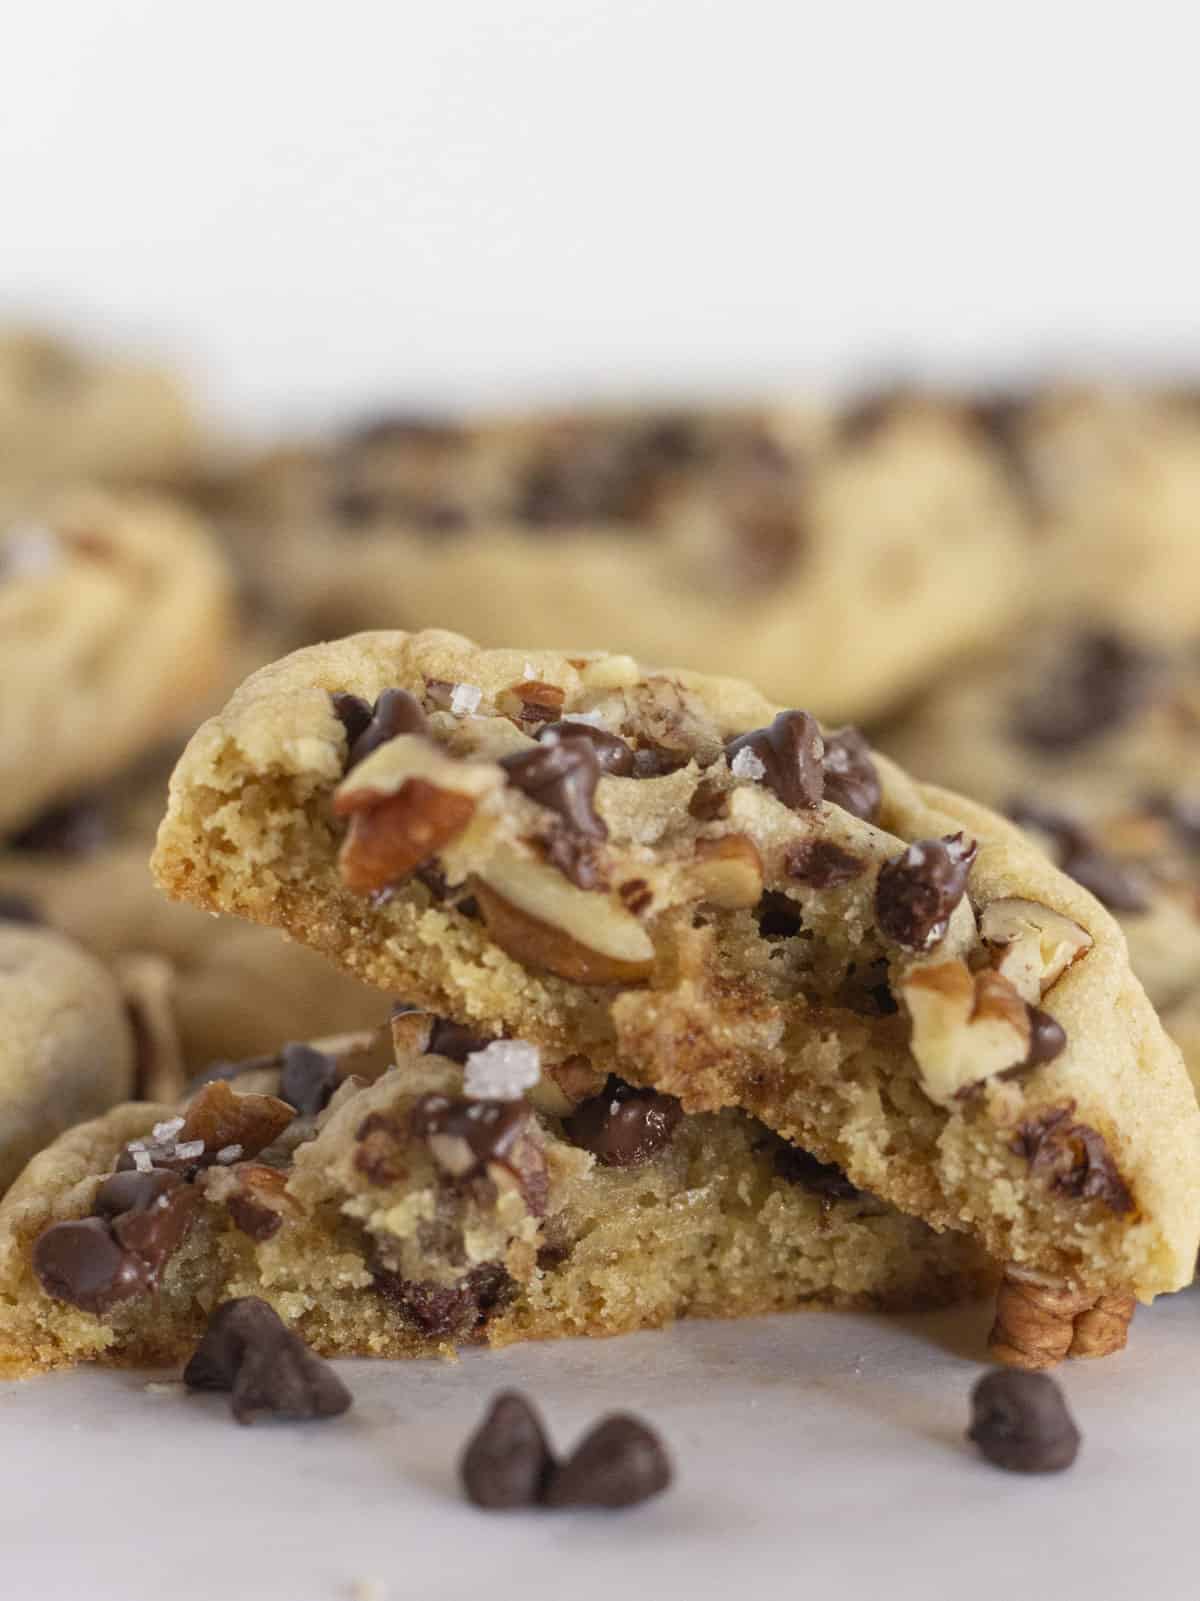 Looking into the middle of Chocolate Chip and Pecan Cookies.